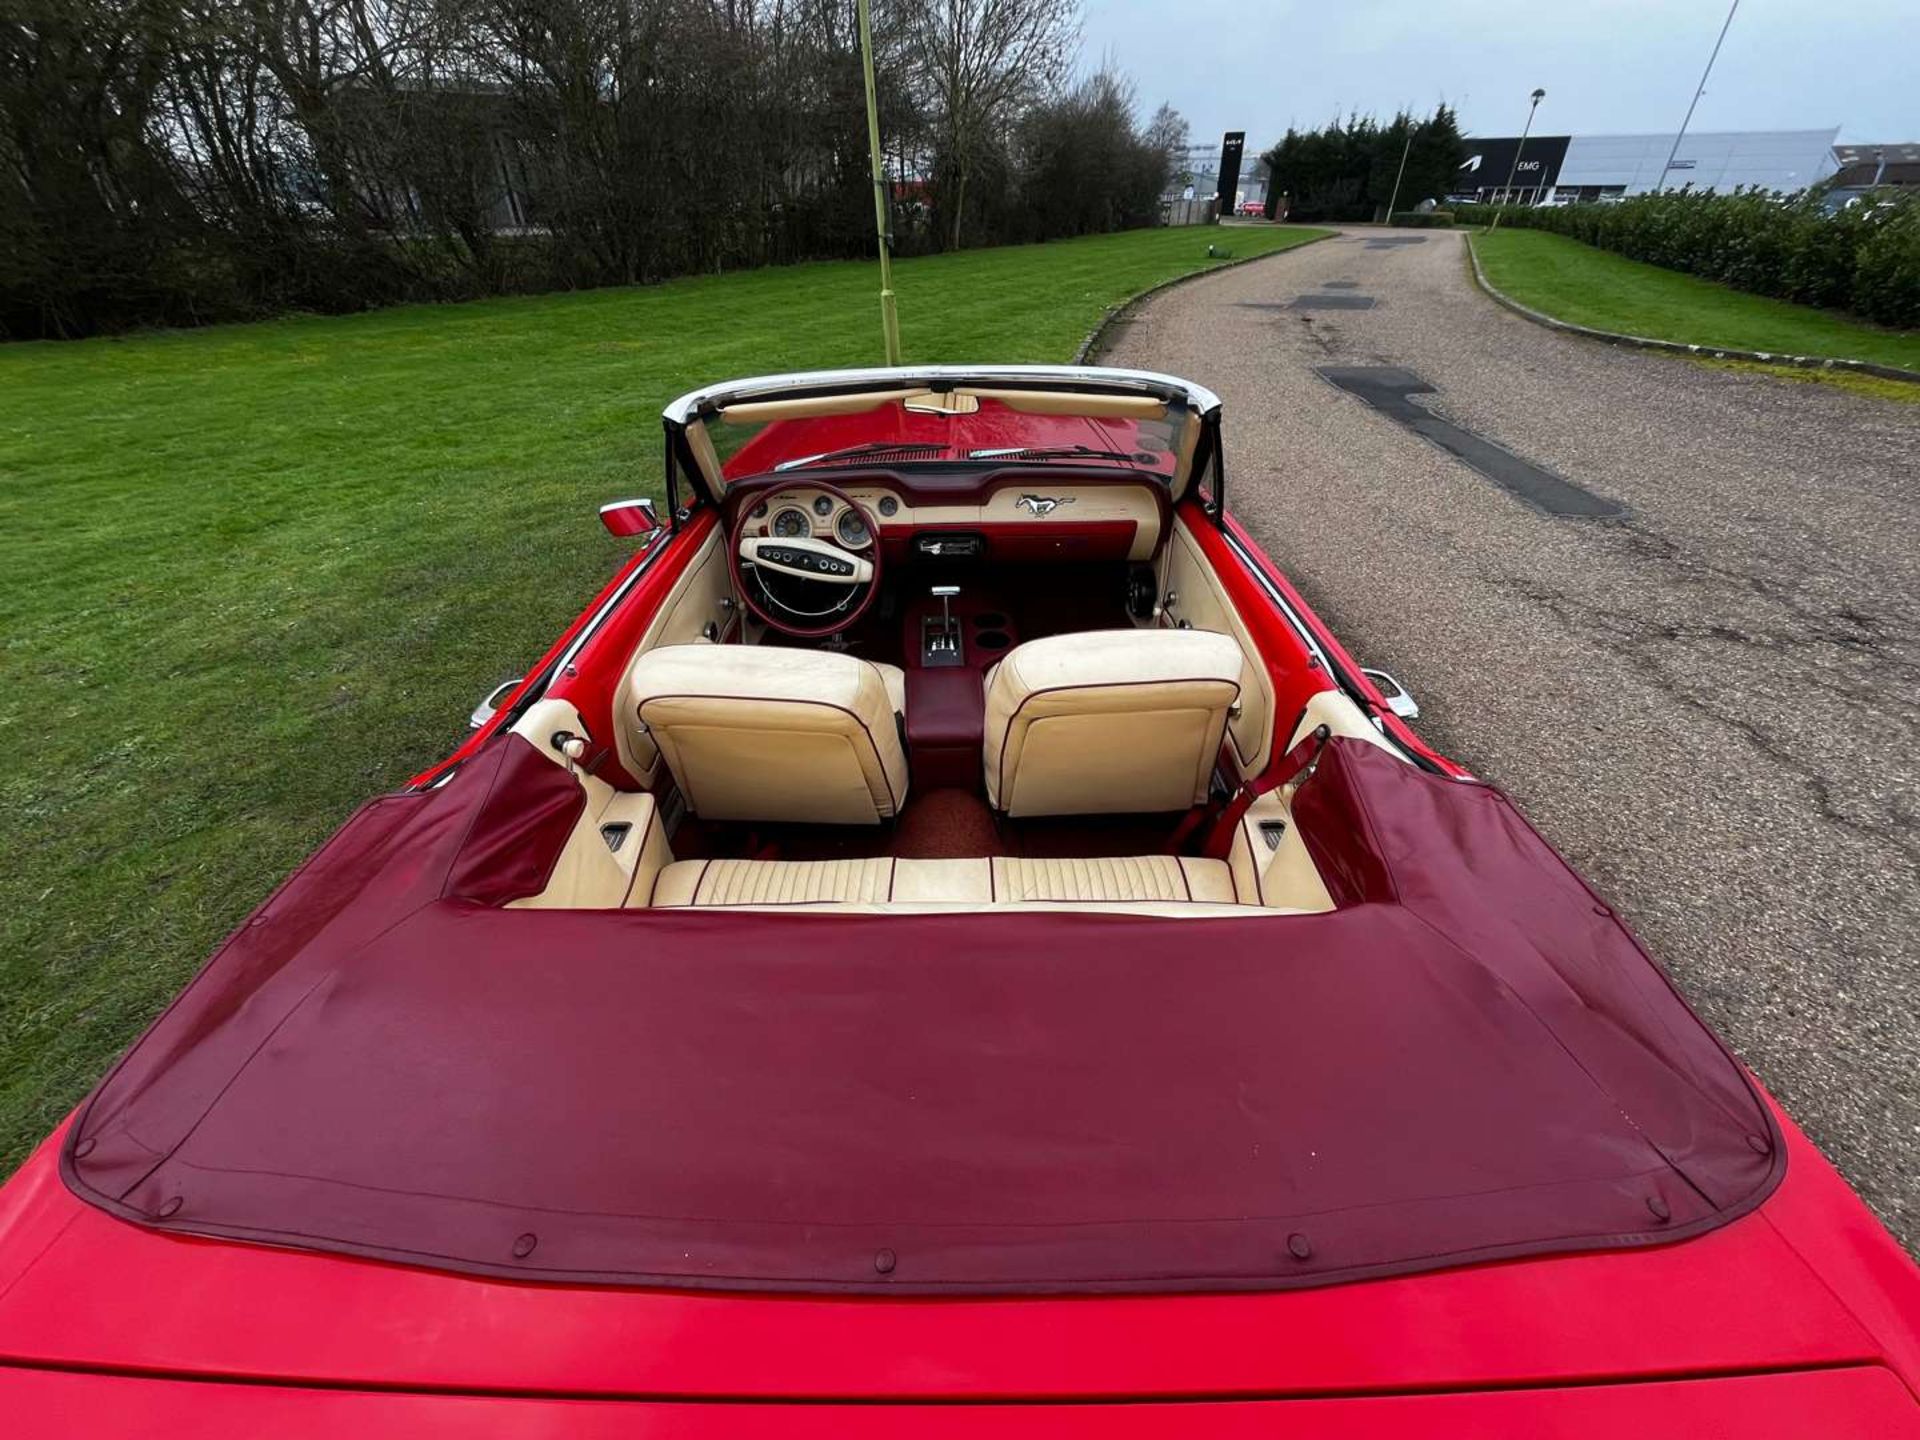 1968 FORD MUSTANG 4.7 V8 AUTO CONVERTIBLE LHD - Image 8 of 30